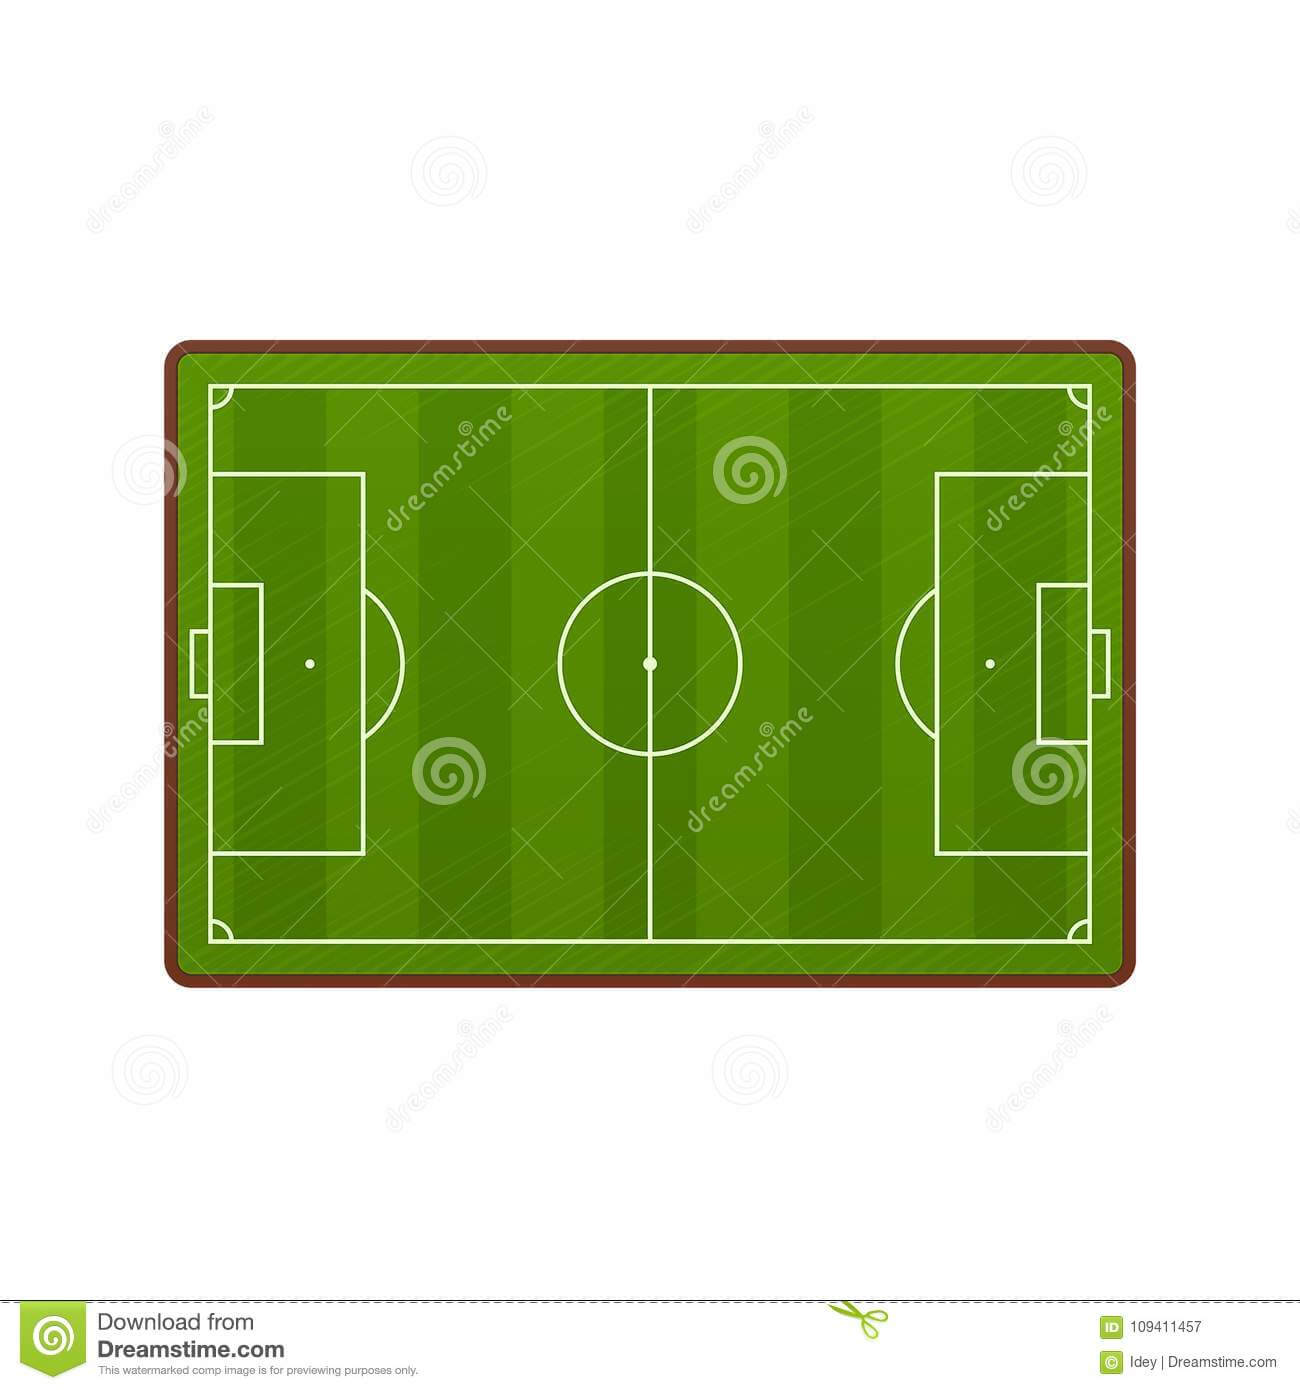 Realistic Football Field Template, Playground With Green Throughout Blank Football Field Template